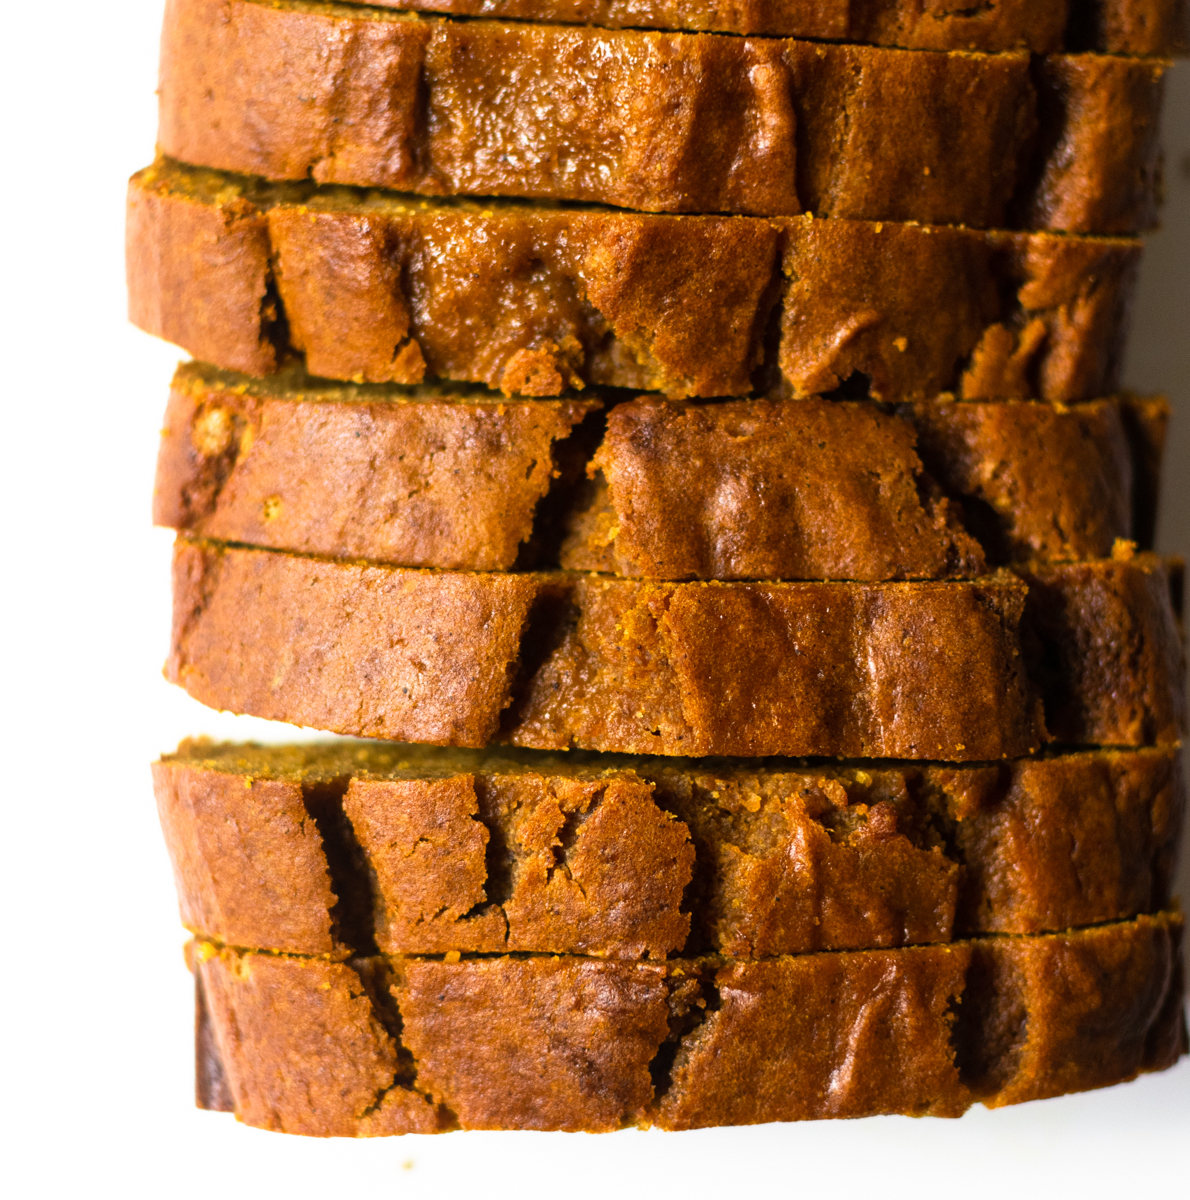 Homemade pumpkin bread is a fall staple for many— packed with classic fall flavors like cinnamon spice, allspice, cloves and tons of pumpkin. This is guaranteed to be the most flavorful pumpkin bread recipe that you've ever had!